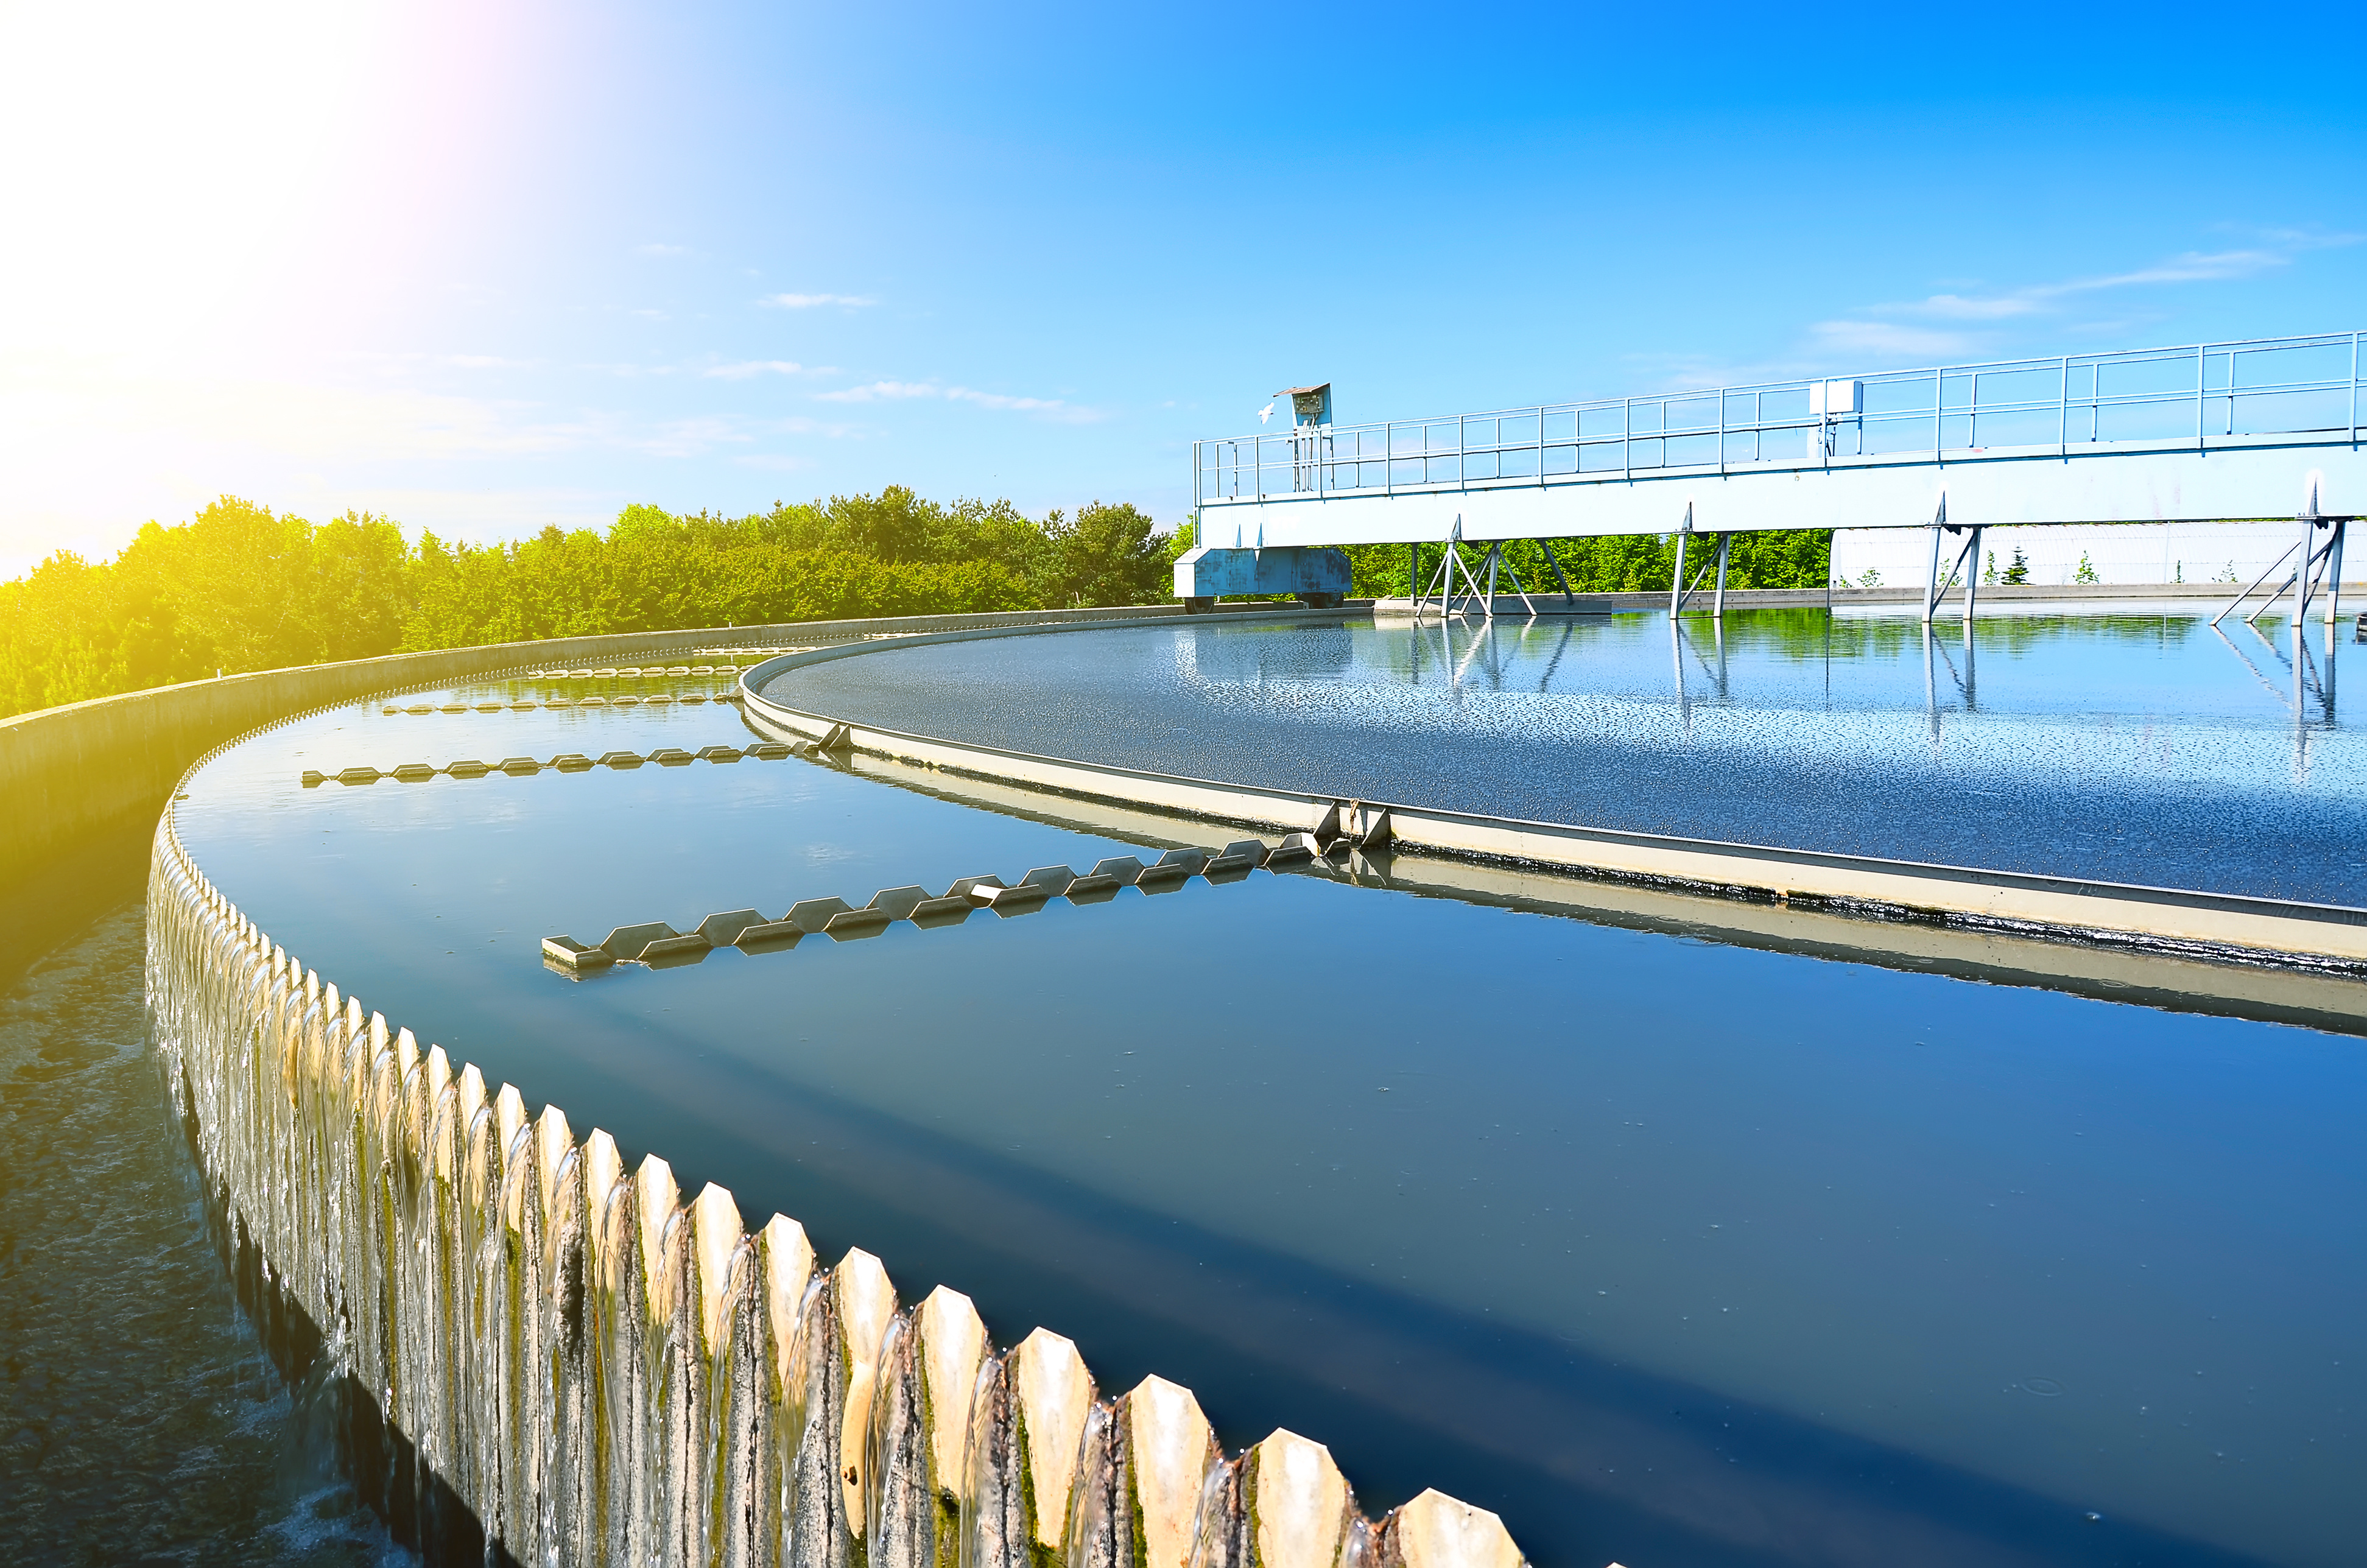 Adobe stock photo of sunrise over a wastewater facility